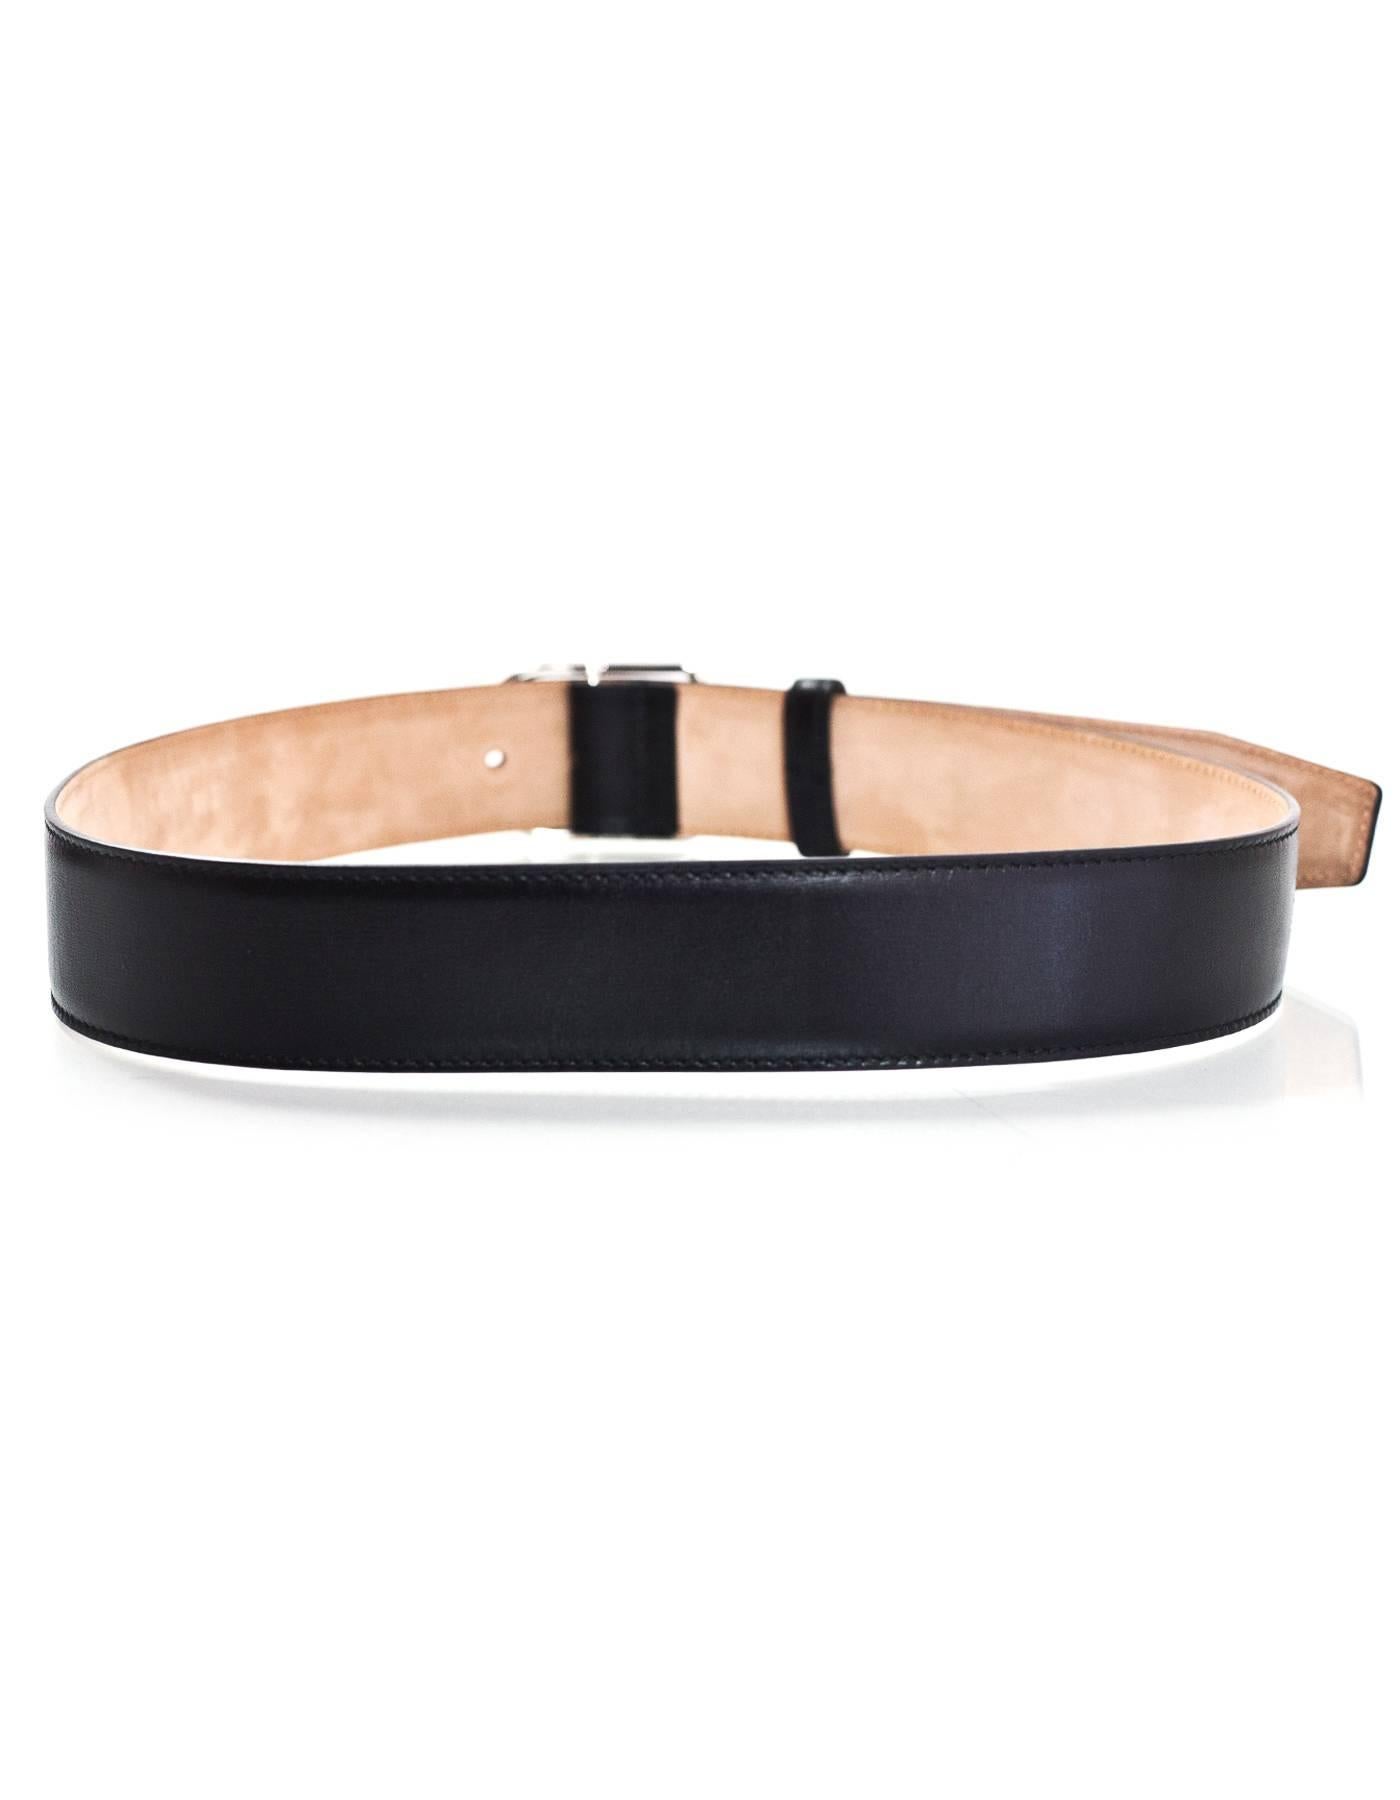 Christian Dior '17 Black Leather 35mm Belt with D Buckle Sz Small NEW with DB In Excellent Condition In New York, NY